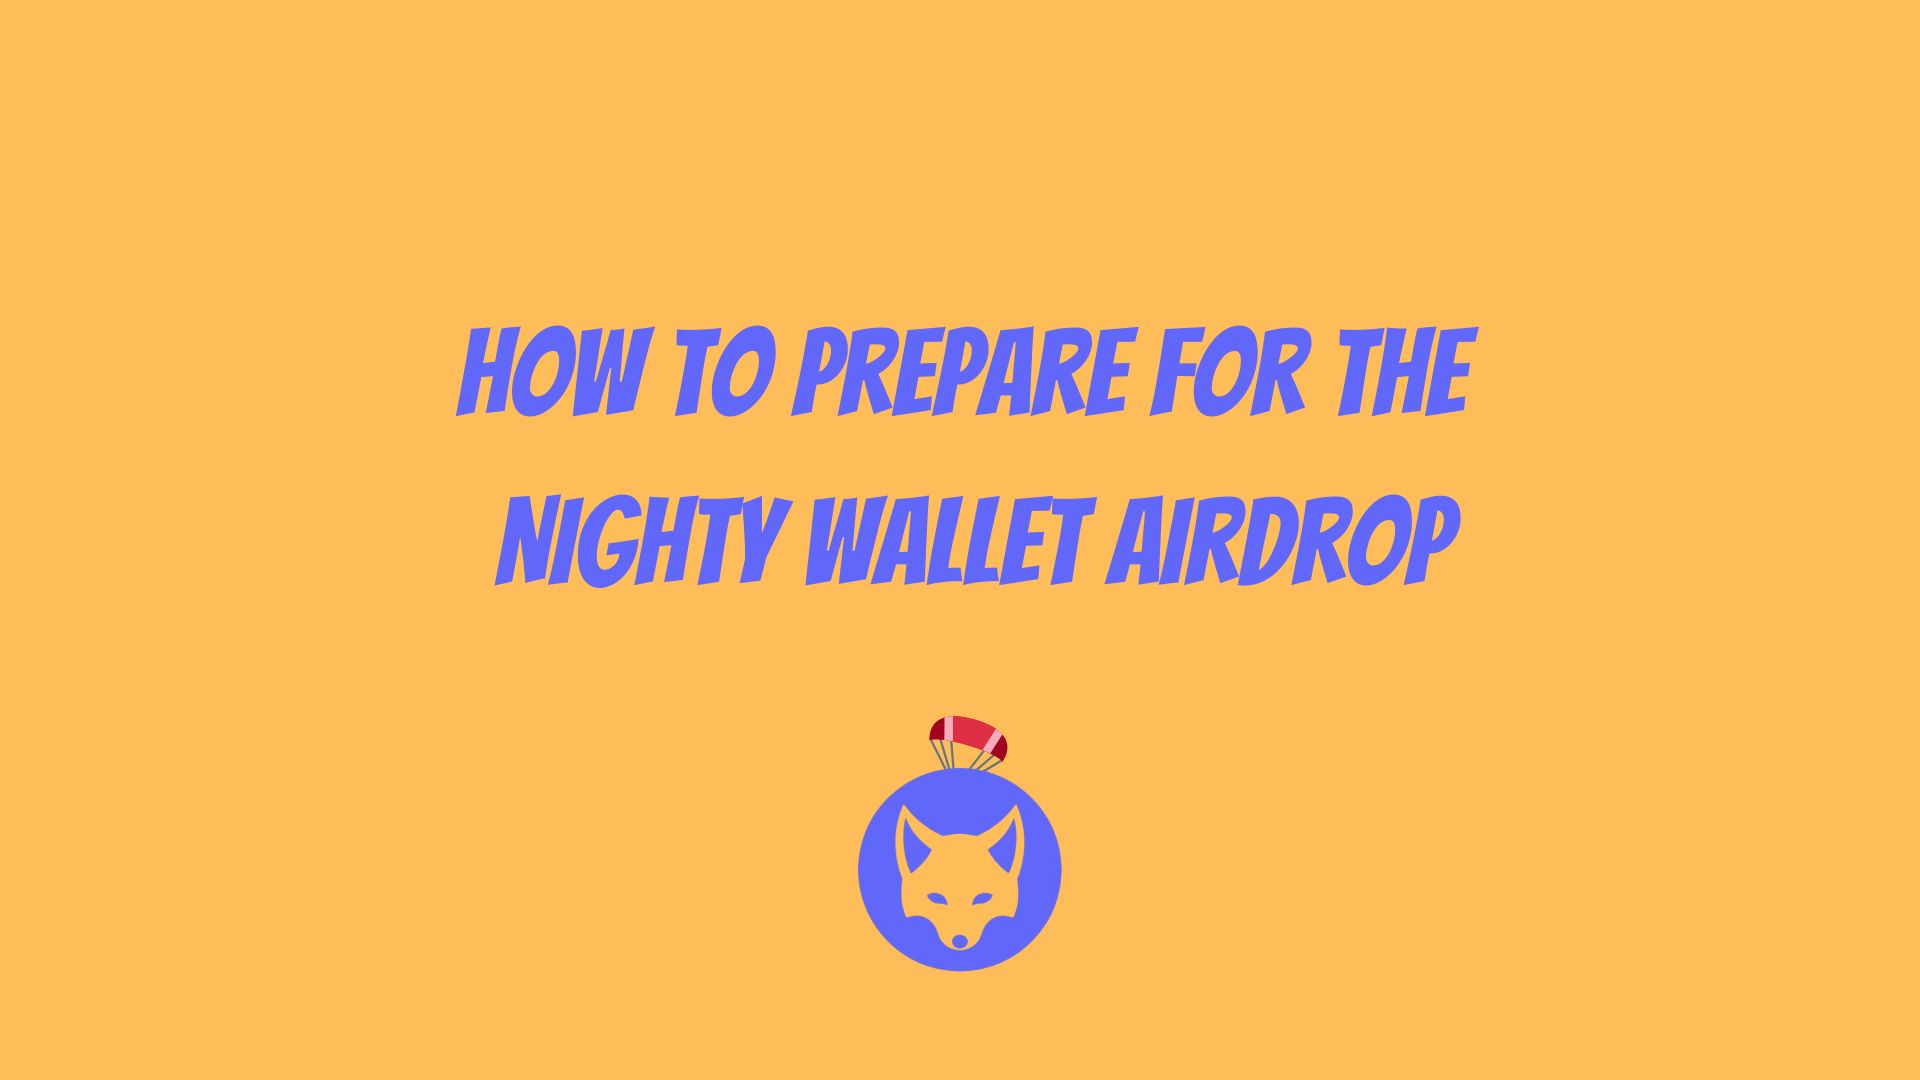 How To Prepare For The Nighty Wallet Airdrop.jpg